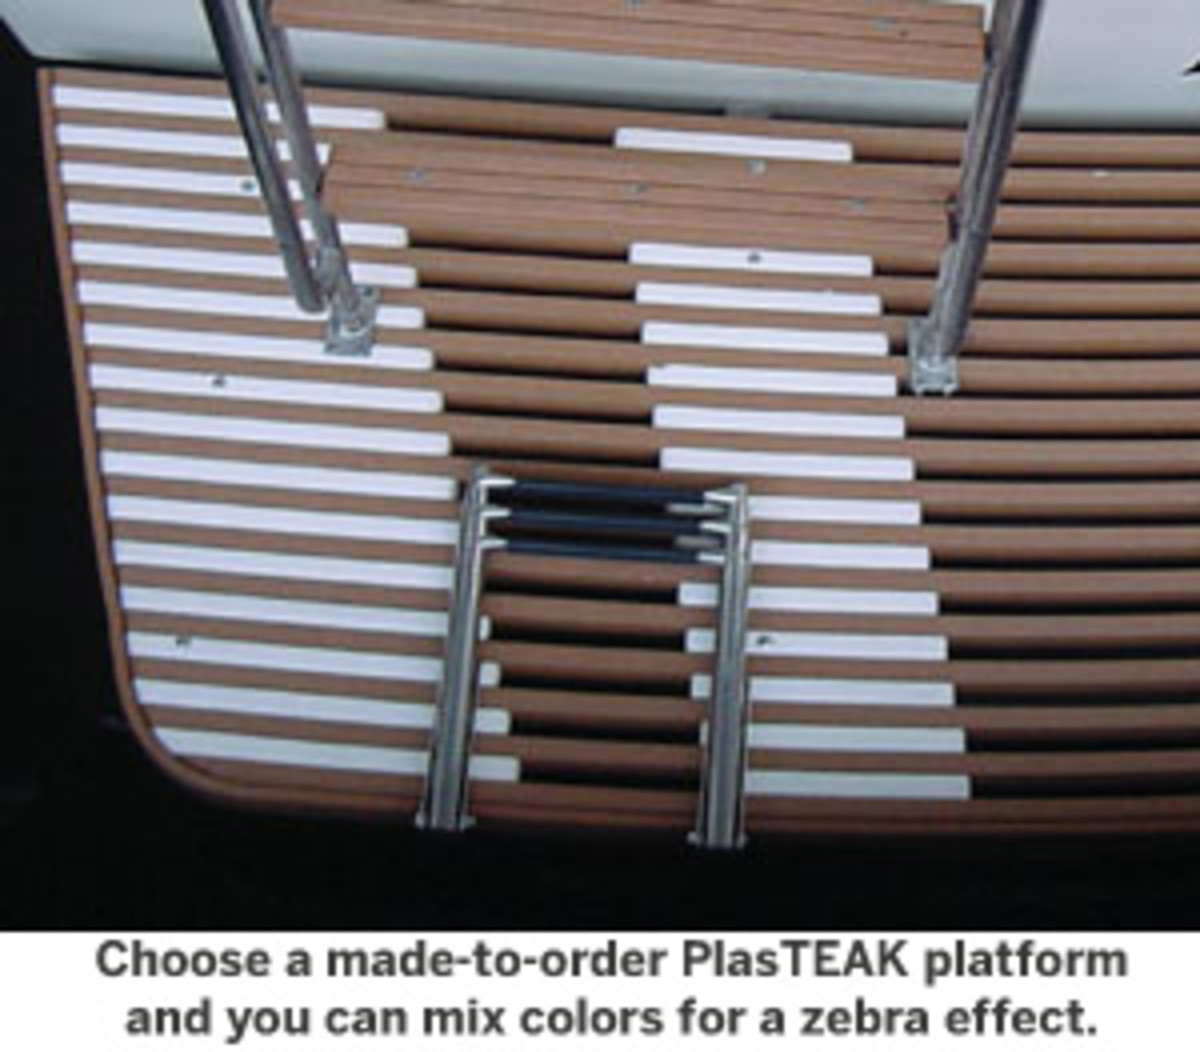 Choose a made-to-order PlasTEAK platform and you can mix colors for a zebra effect.